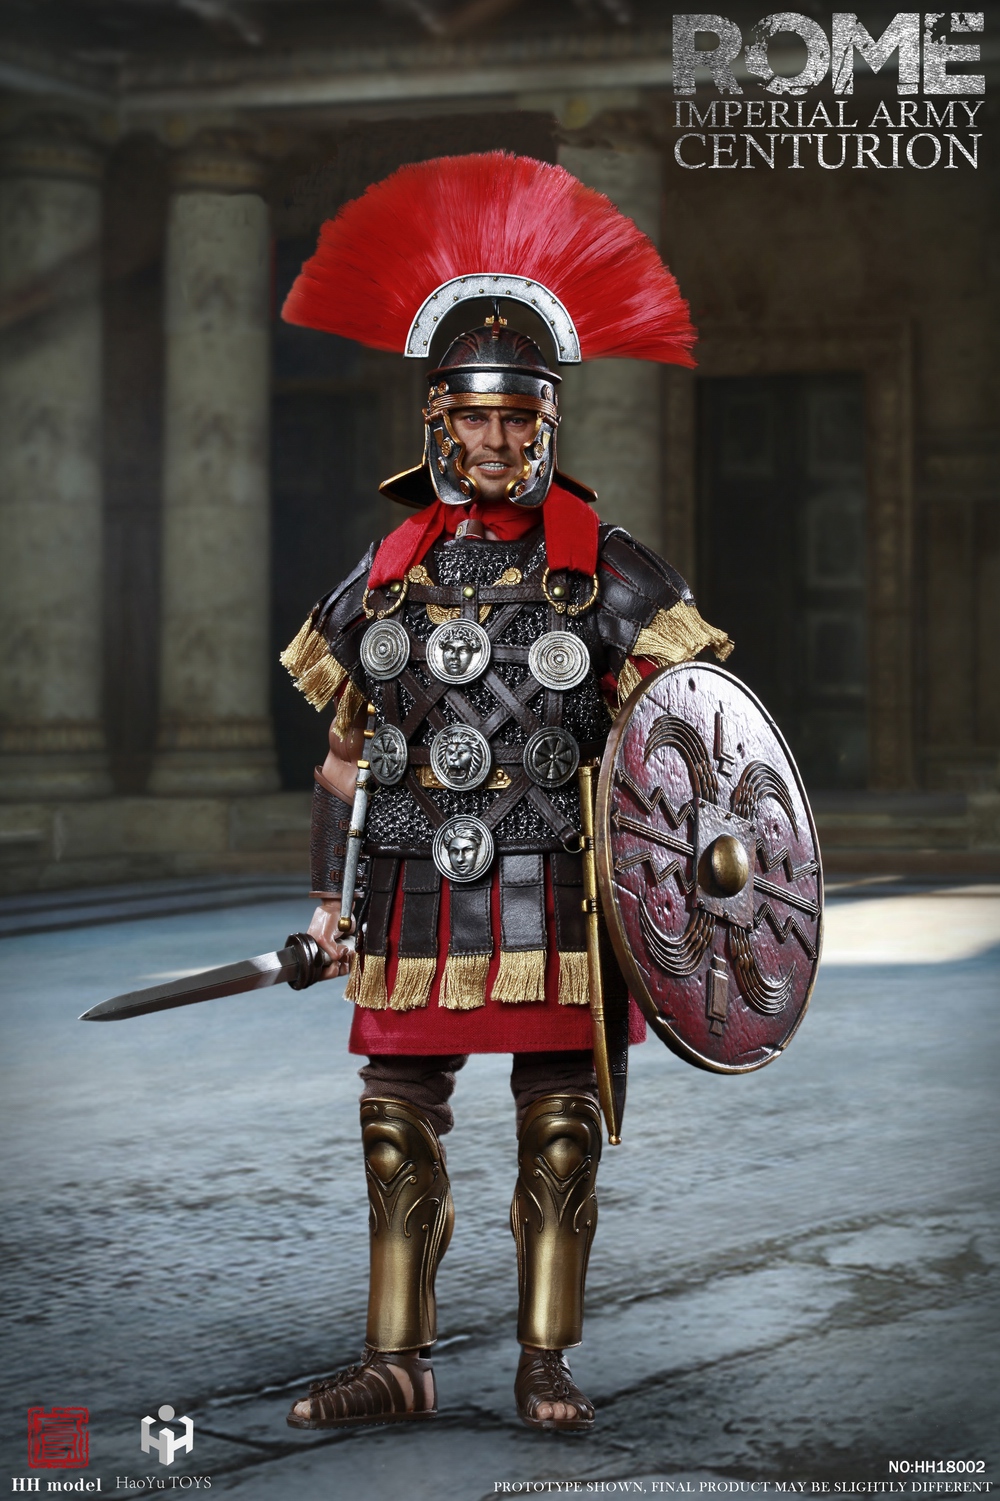 RomanCenturion - NEW PRODUCT: HH Model X HaoYuTOYS :1/6 Imperial Army — Centurion Action Figure 12331110